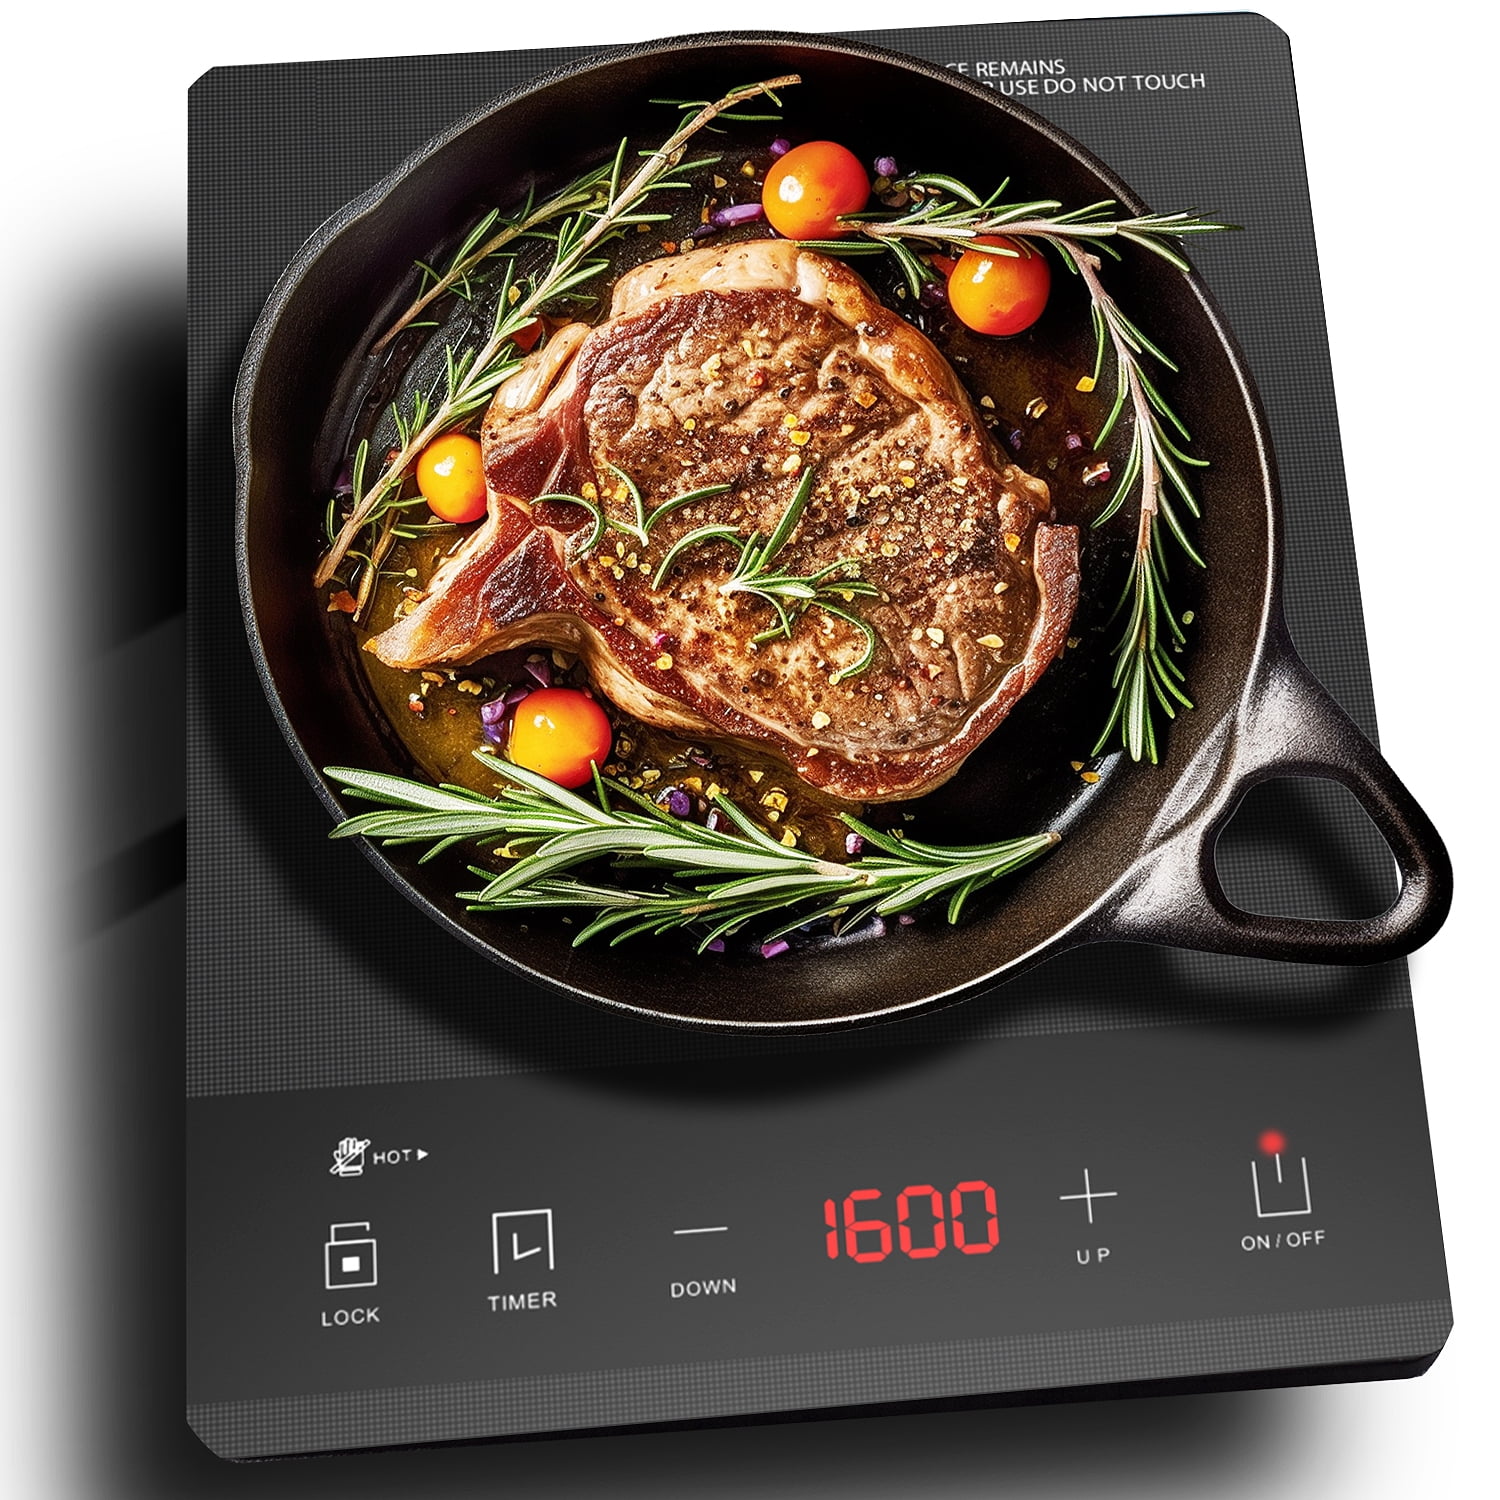 Cadco 120v 1500w Hot Plate - Myers Mushrooms